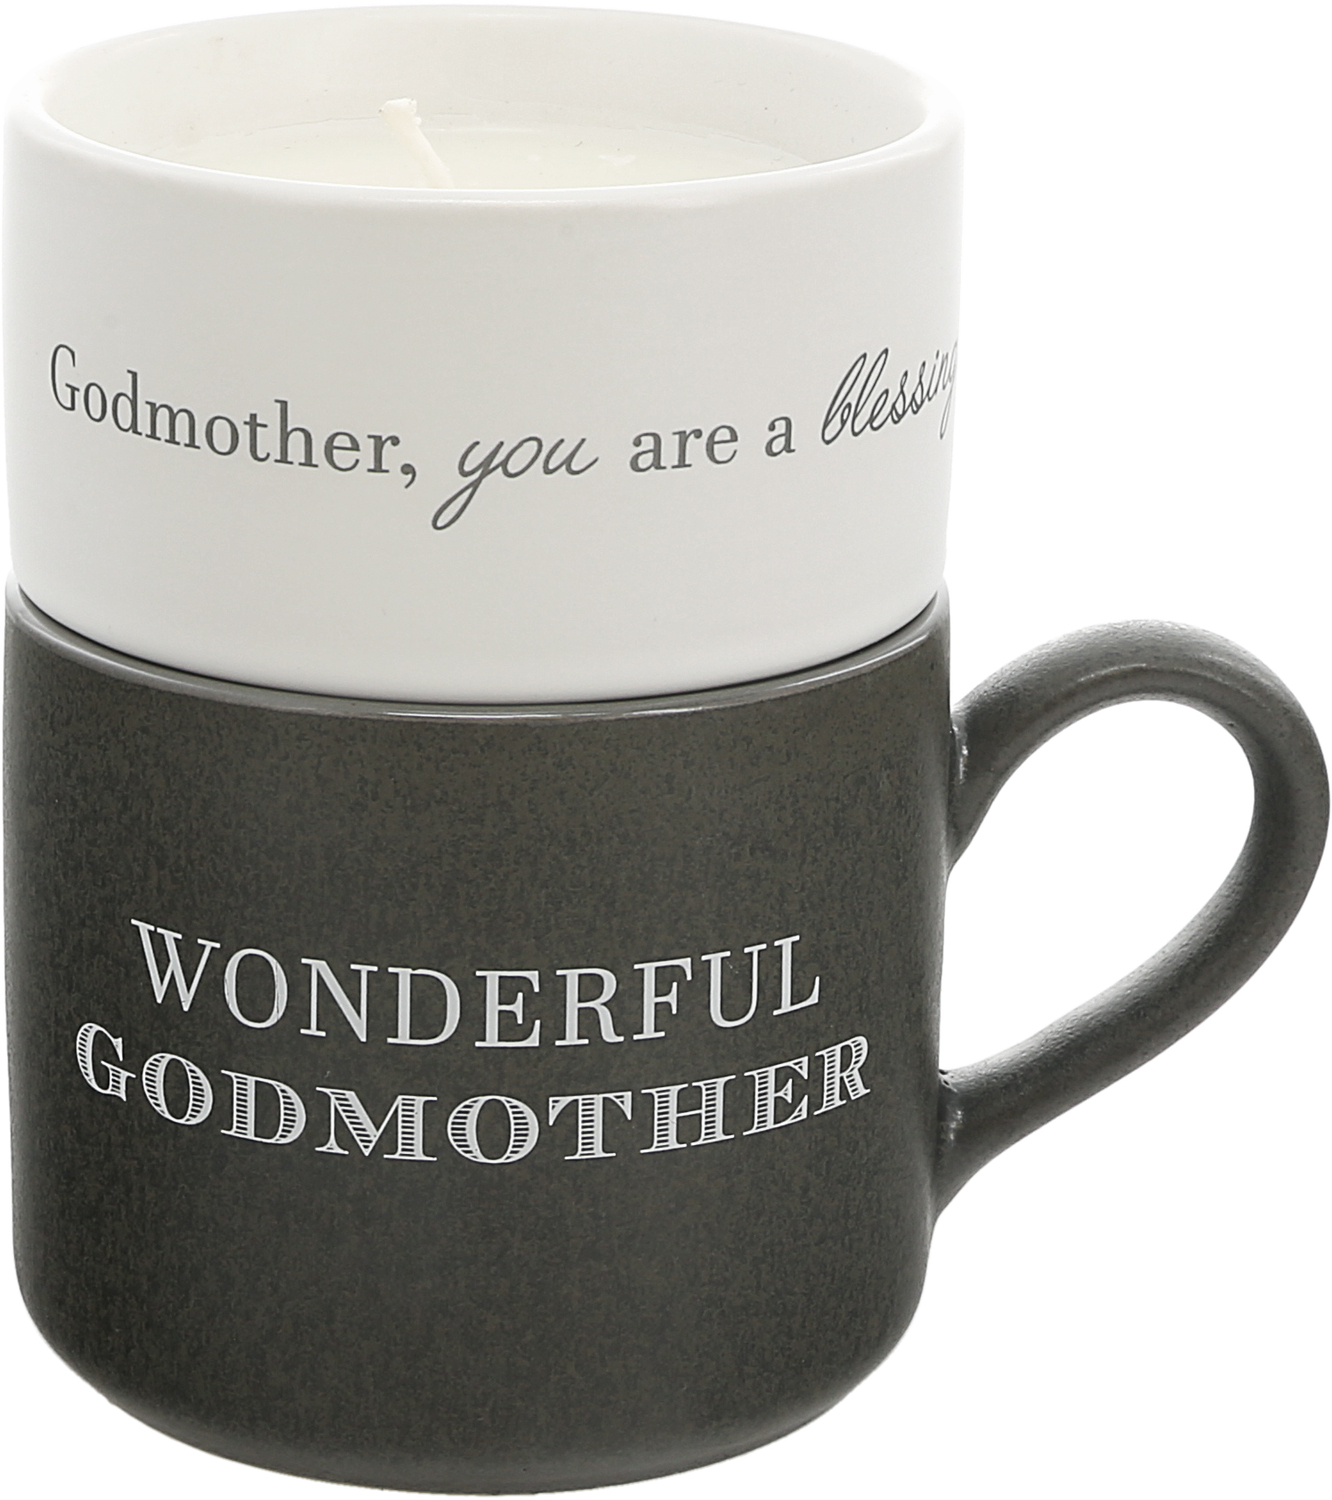 Godmother by Filled with Warmth - Godmother - Stacking Mug and Candle Set
100% Soy Wax Scent: Tranquility